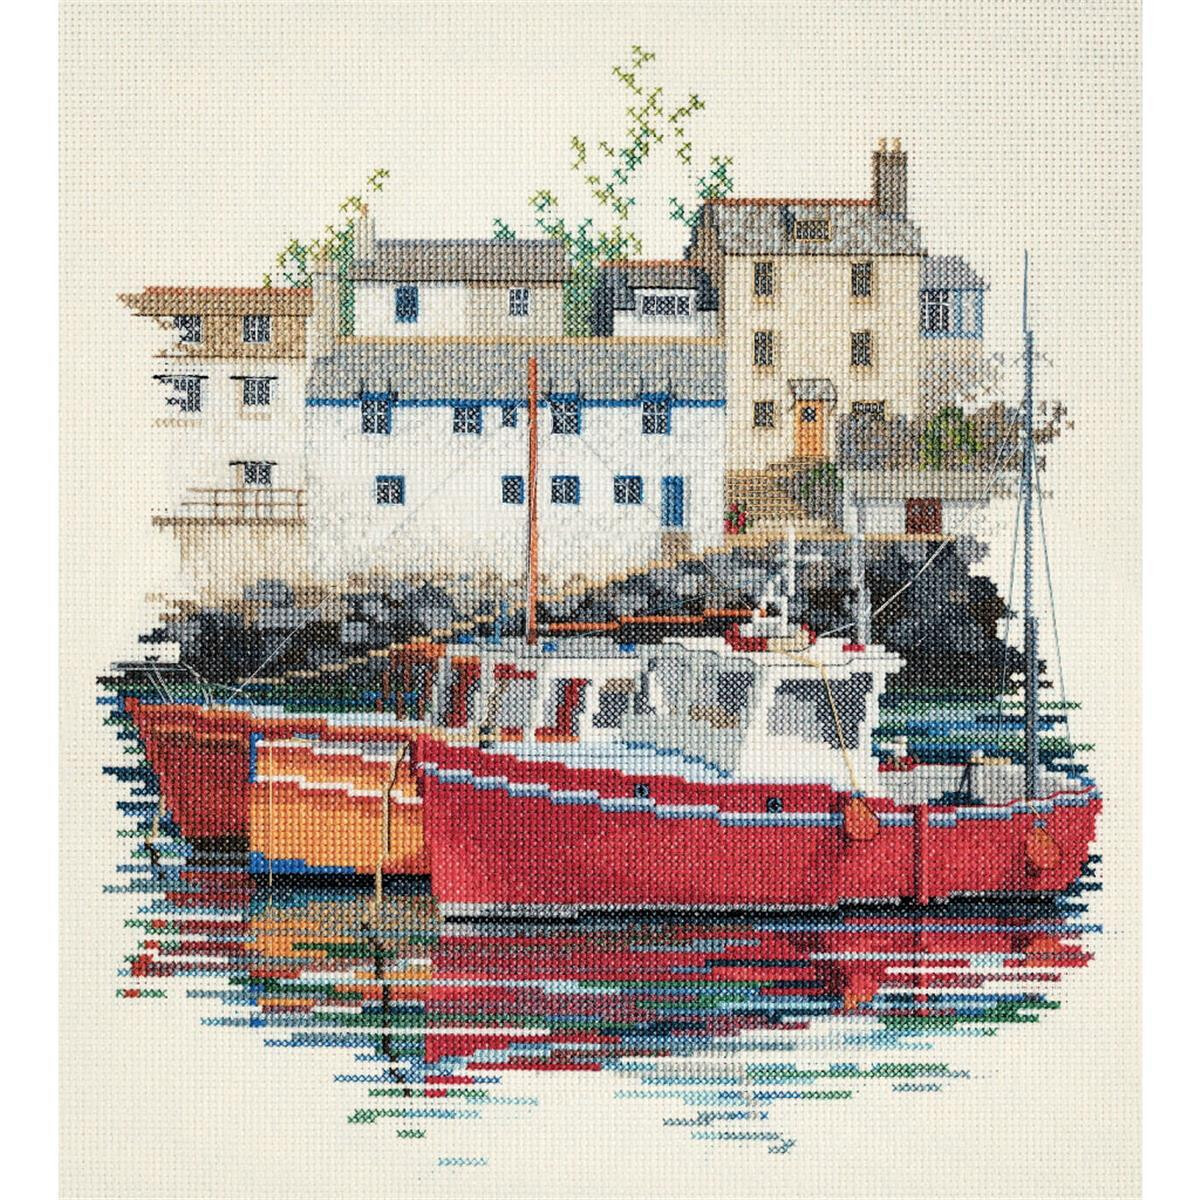 An embroidery pack from Bothy Threads shows two red boats...